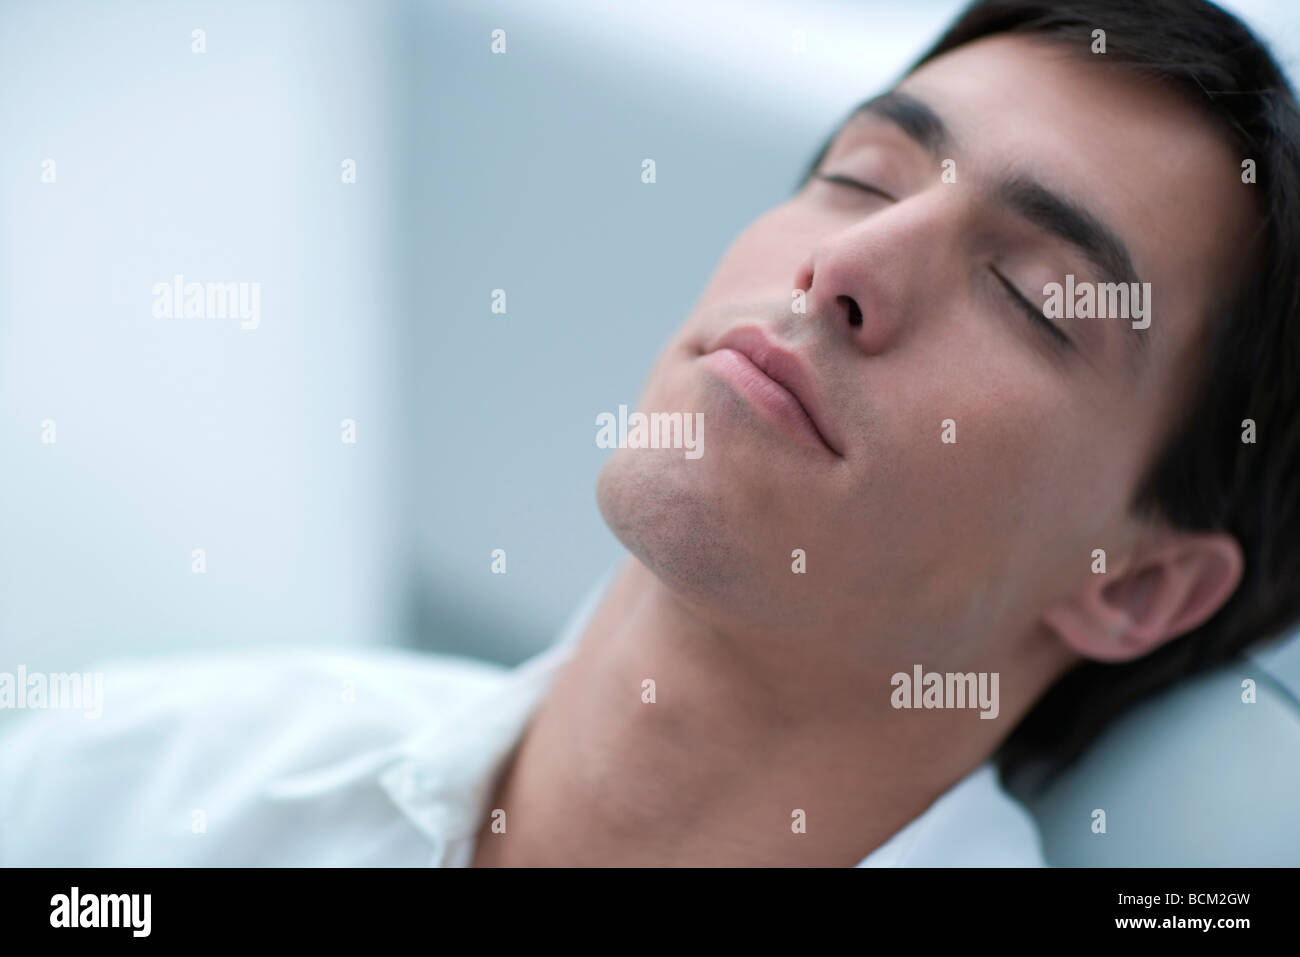 Young man leaning back, eyes closed, close-up Stock Photo - Alamy